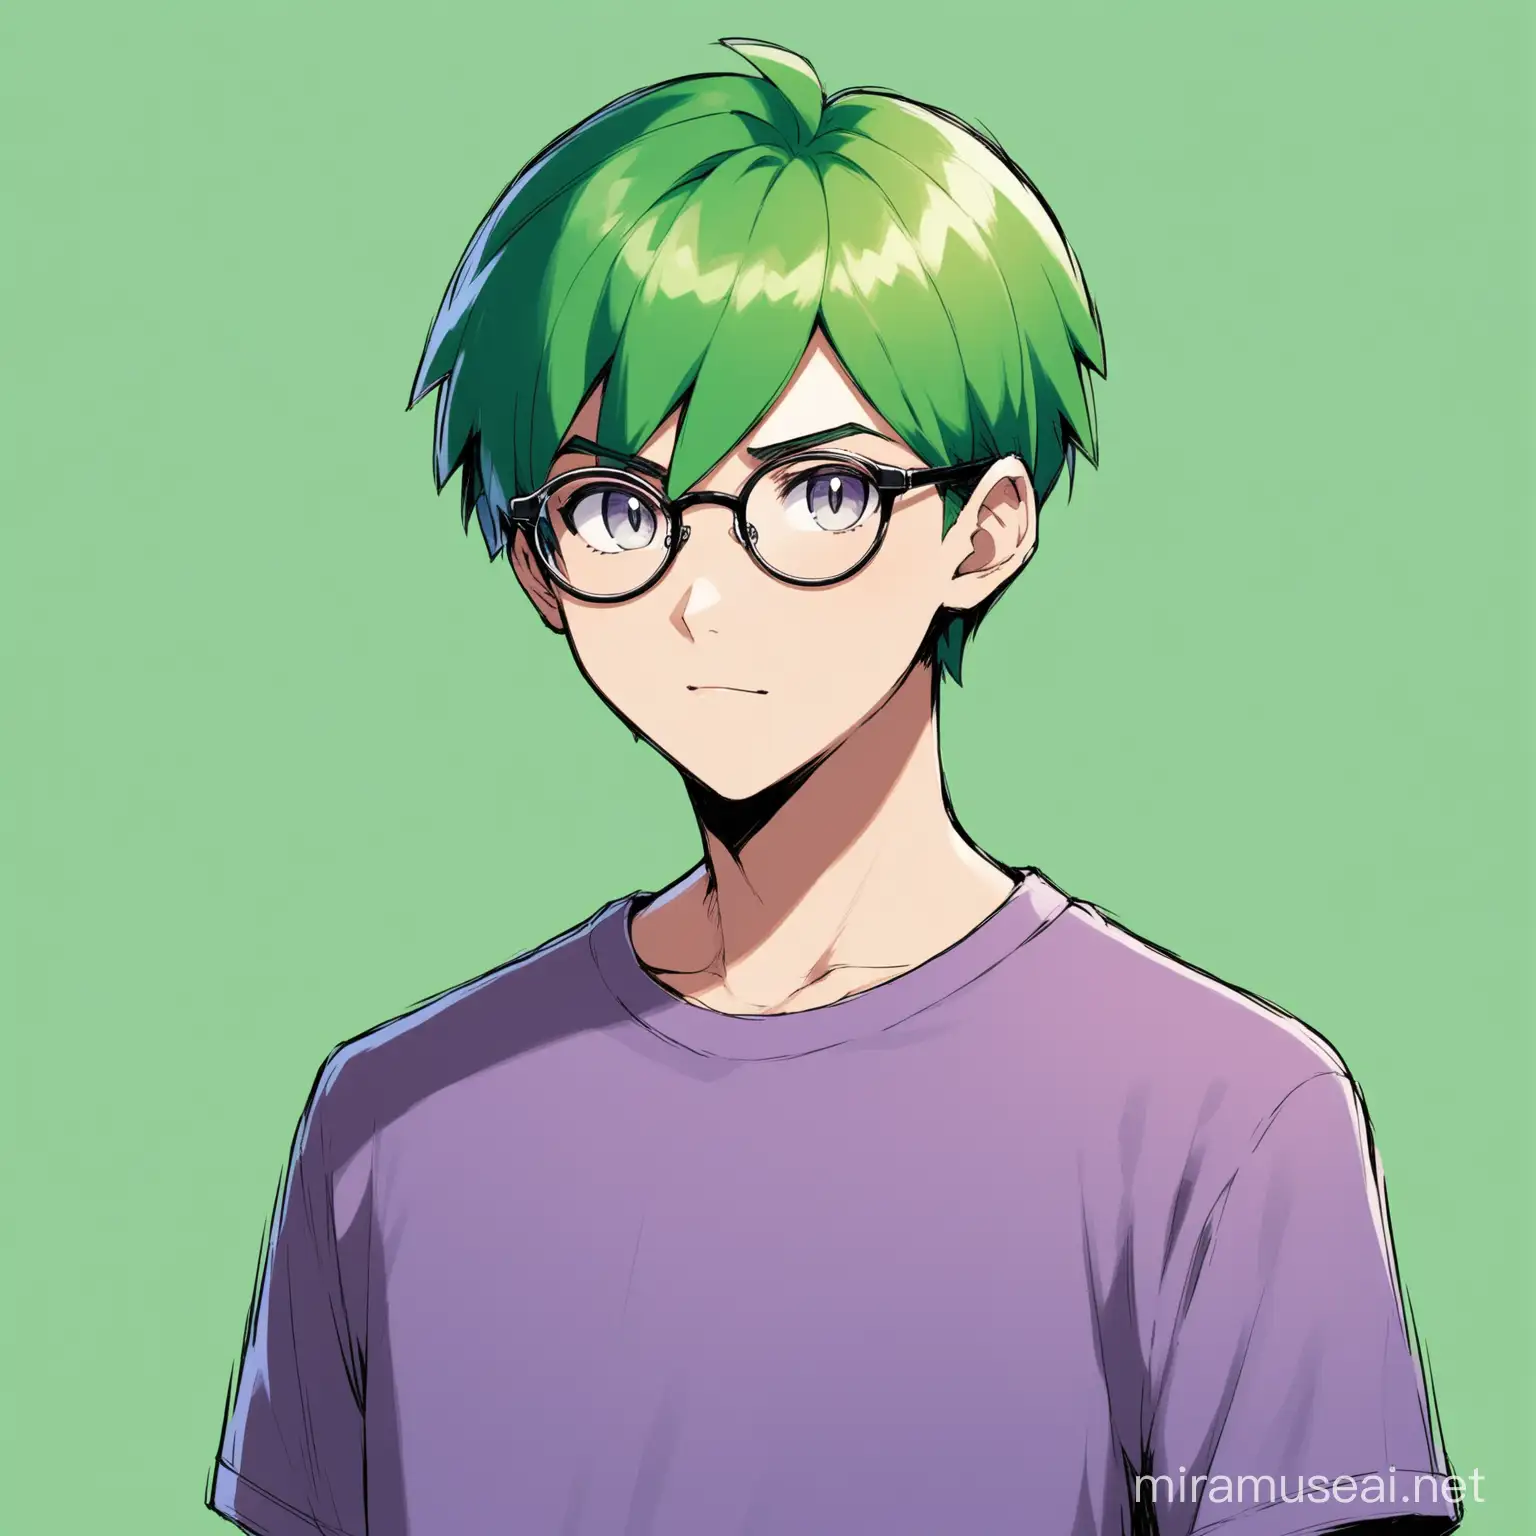 Pokemon style, green short haired, young man, grey eyes, glasses, purple shirt